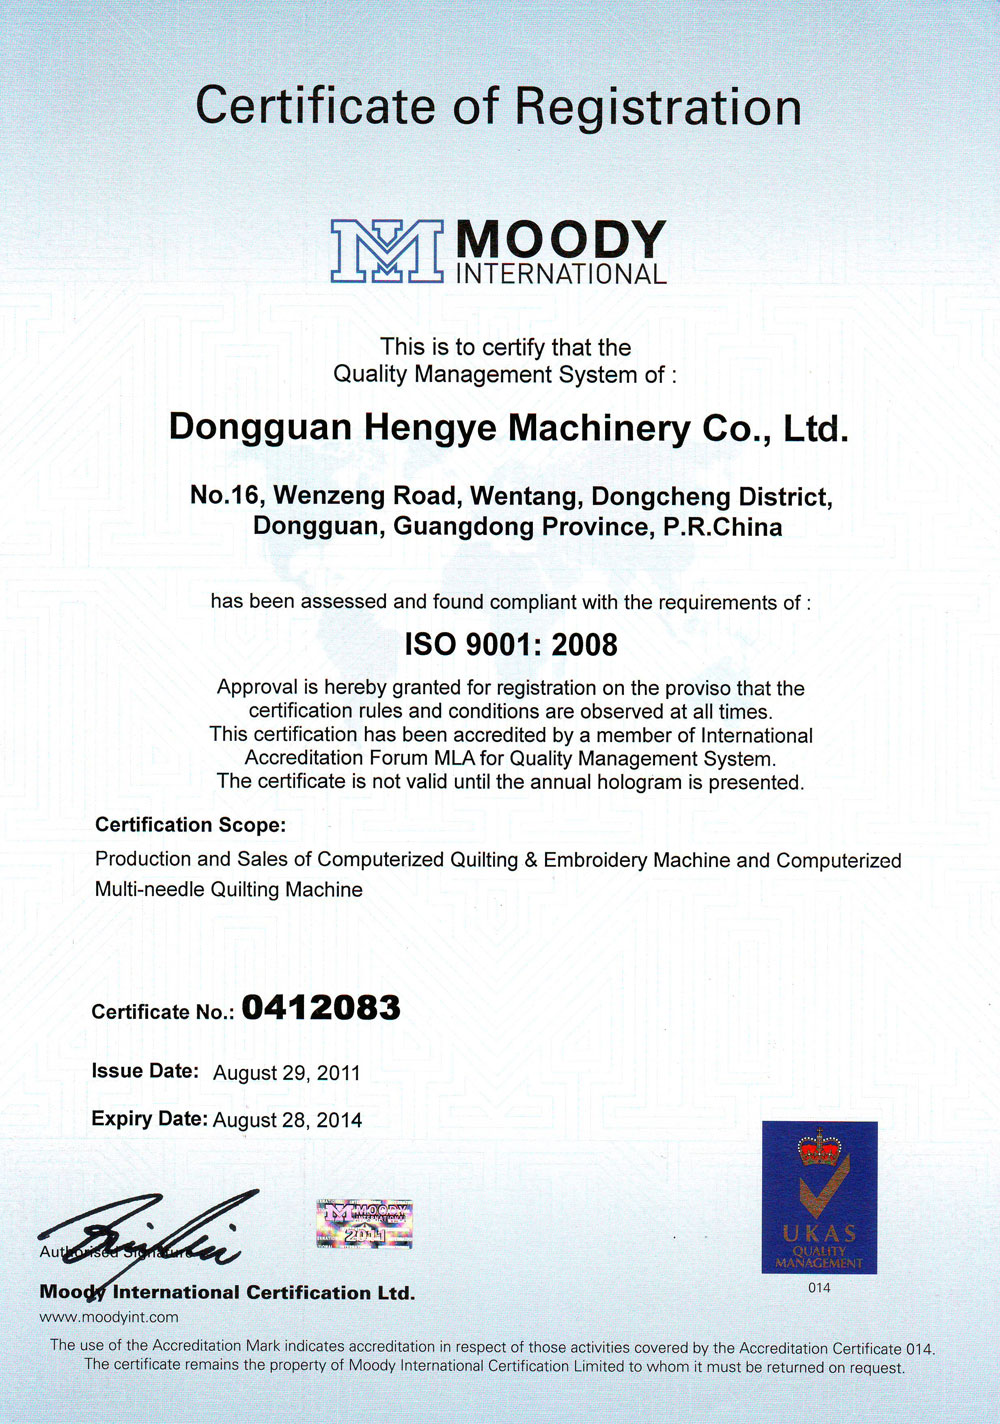 ISO9001:2000 Certificate No:0412083